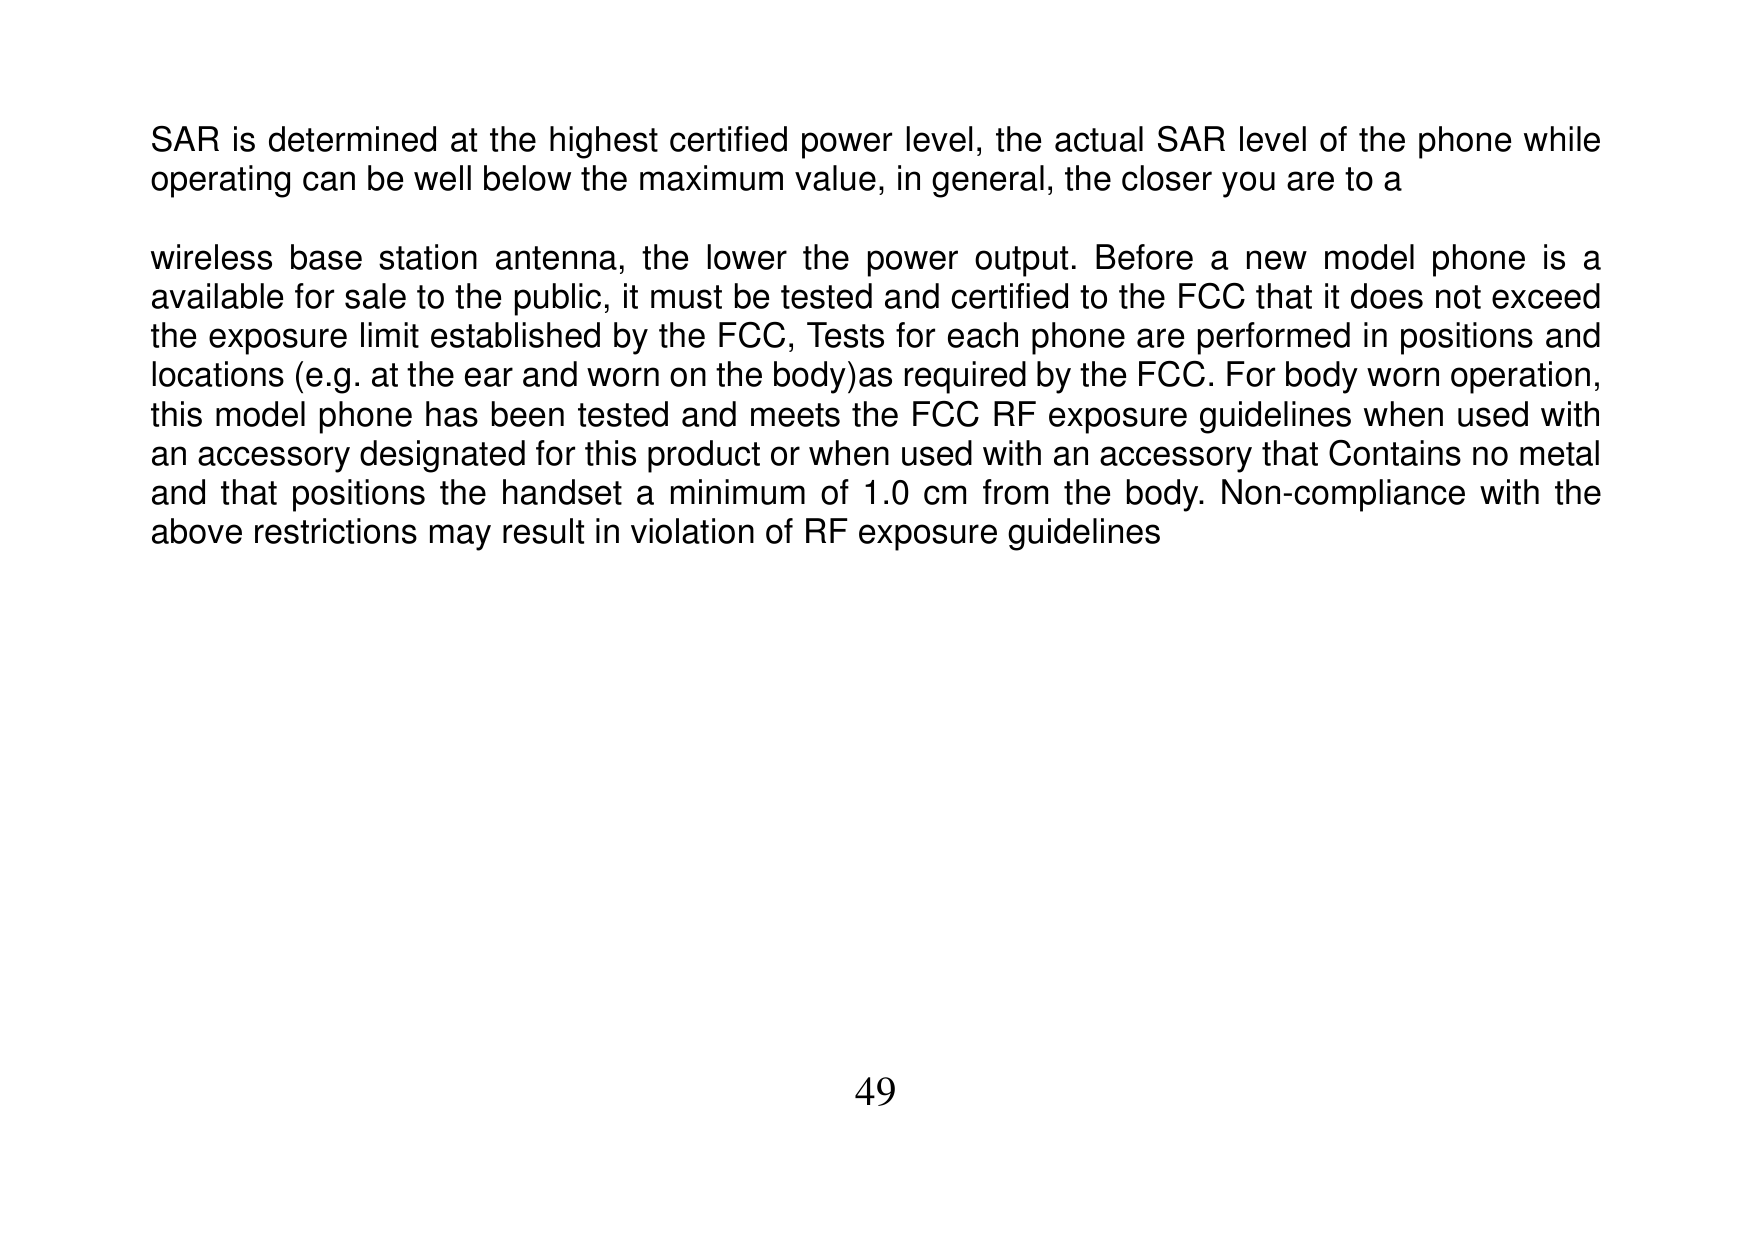 SAR is determined at the highest certified power level, the actual SAR level of the phone whileoperating can be well below the m